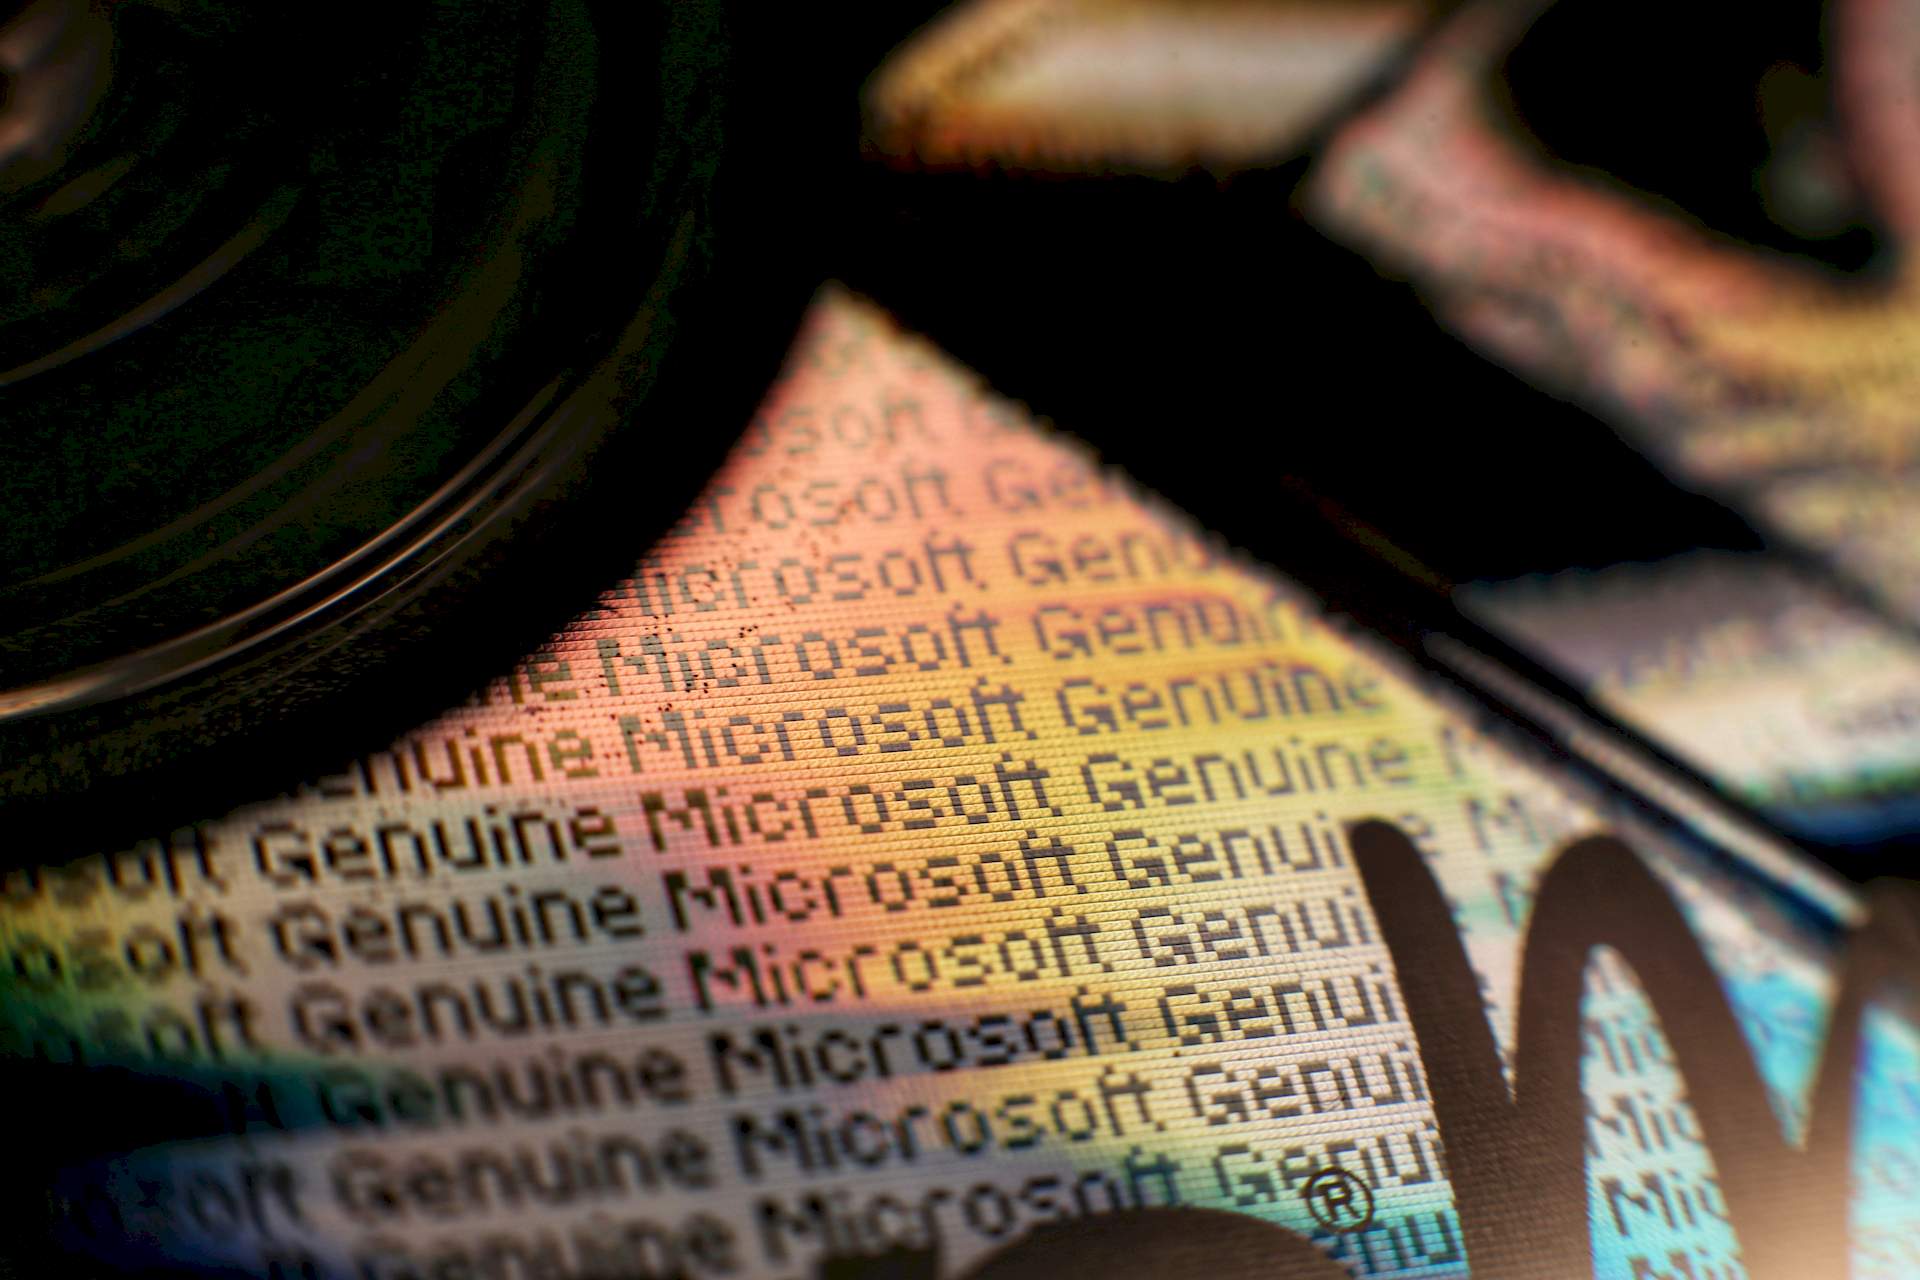 The recent Microsoft security breach has an unusual motivation